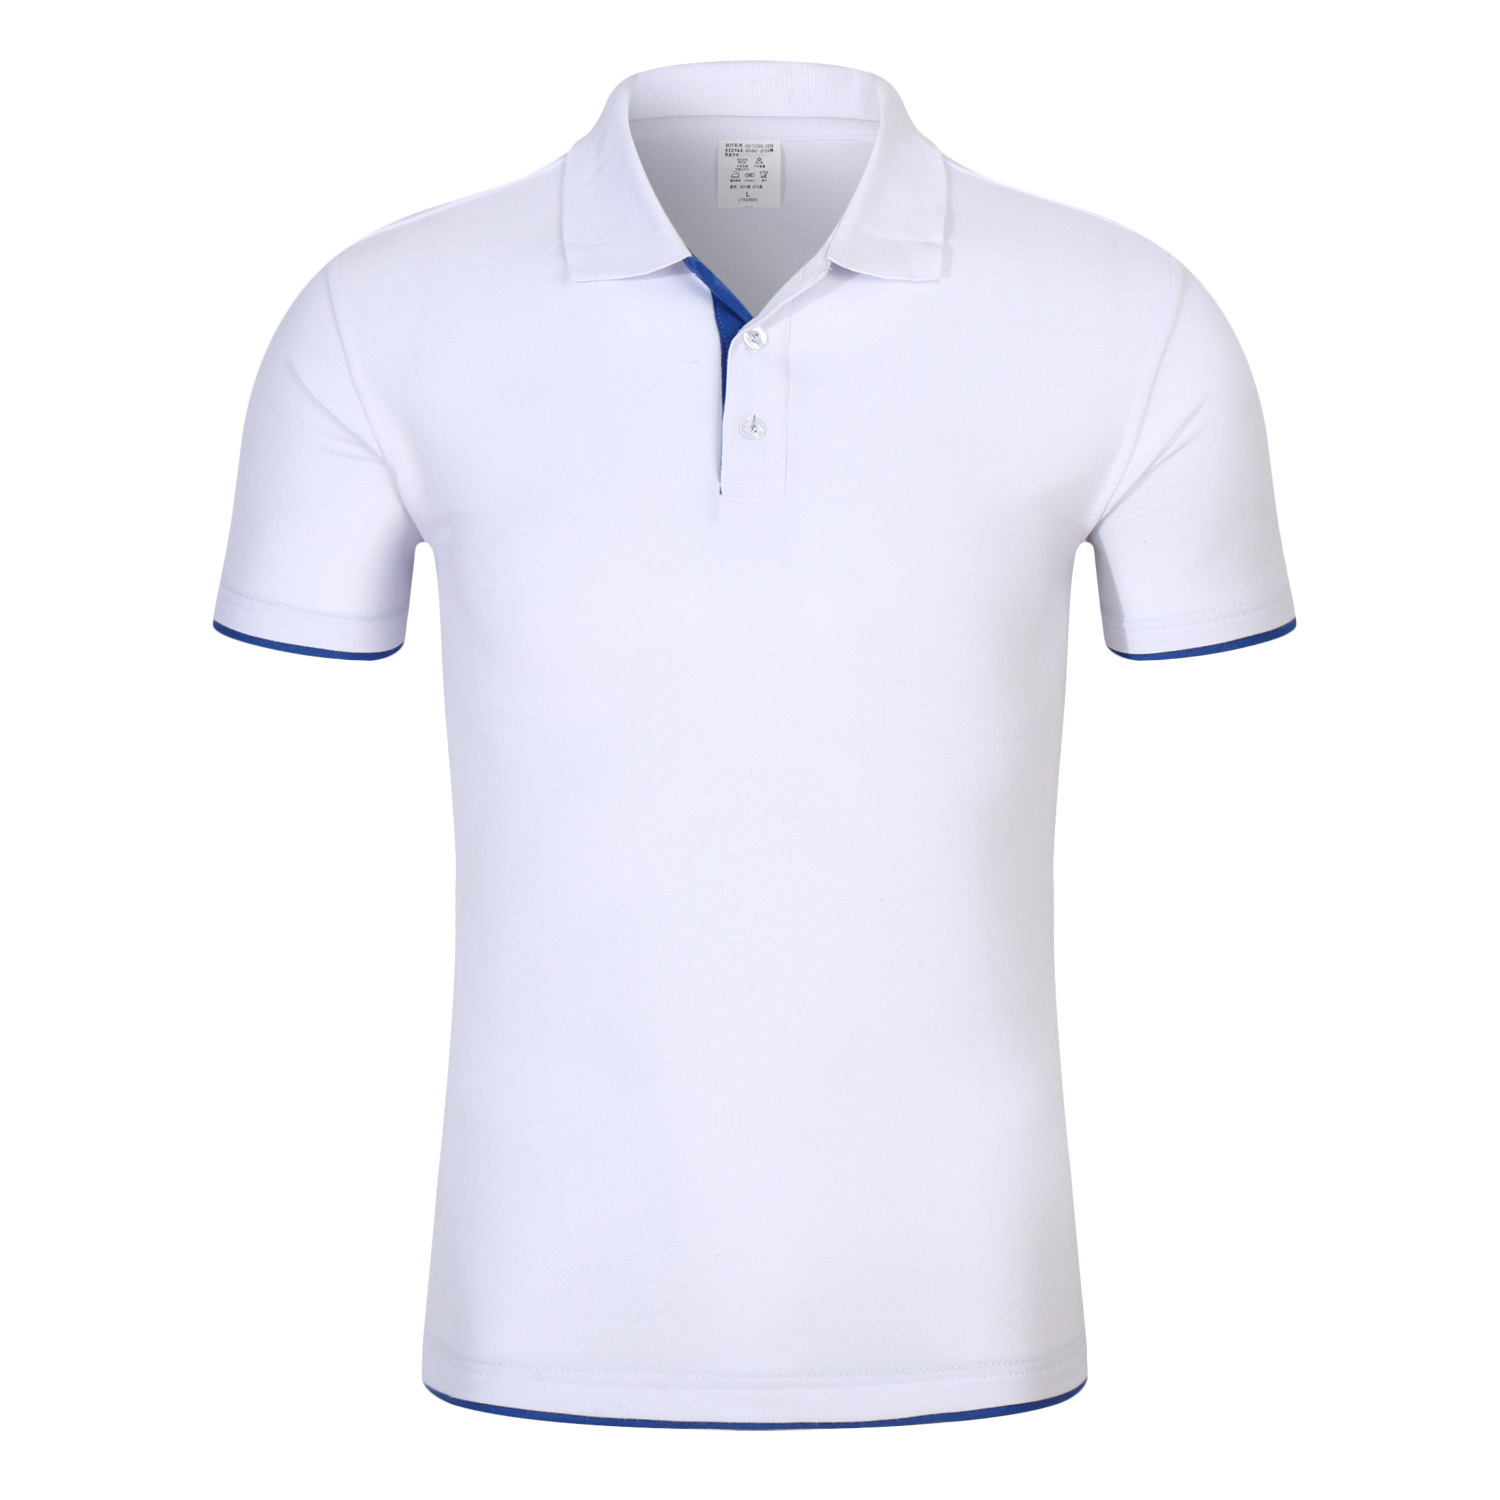 Polo Tshirts in Contrast Colors in Neck/Cuff/Bottom